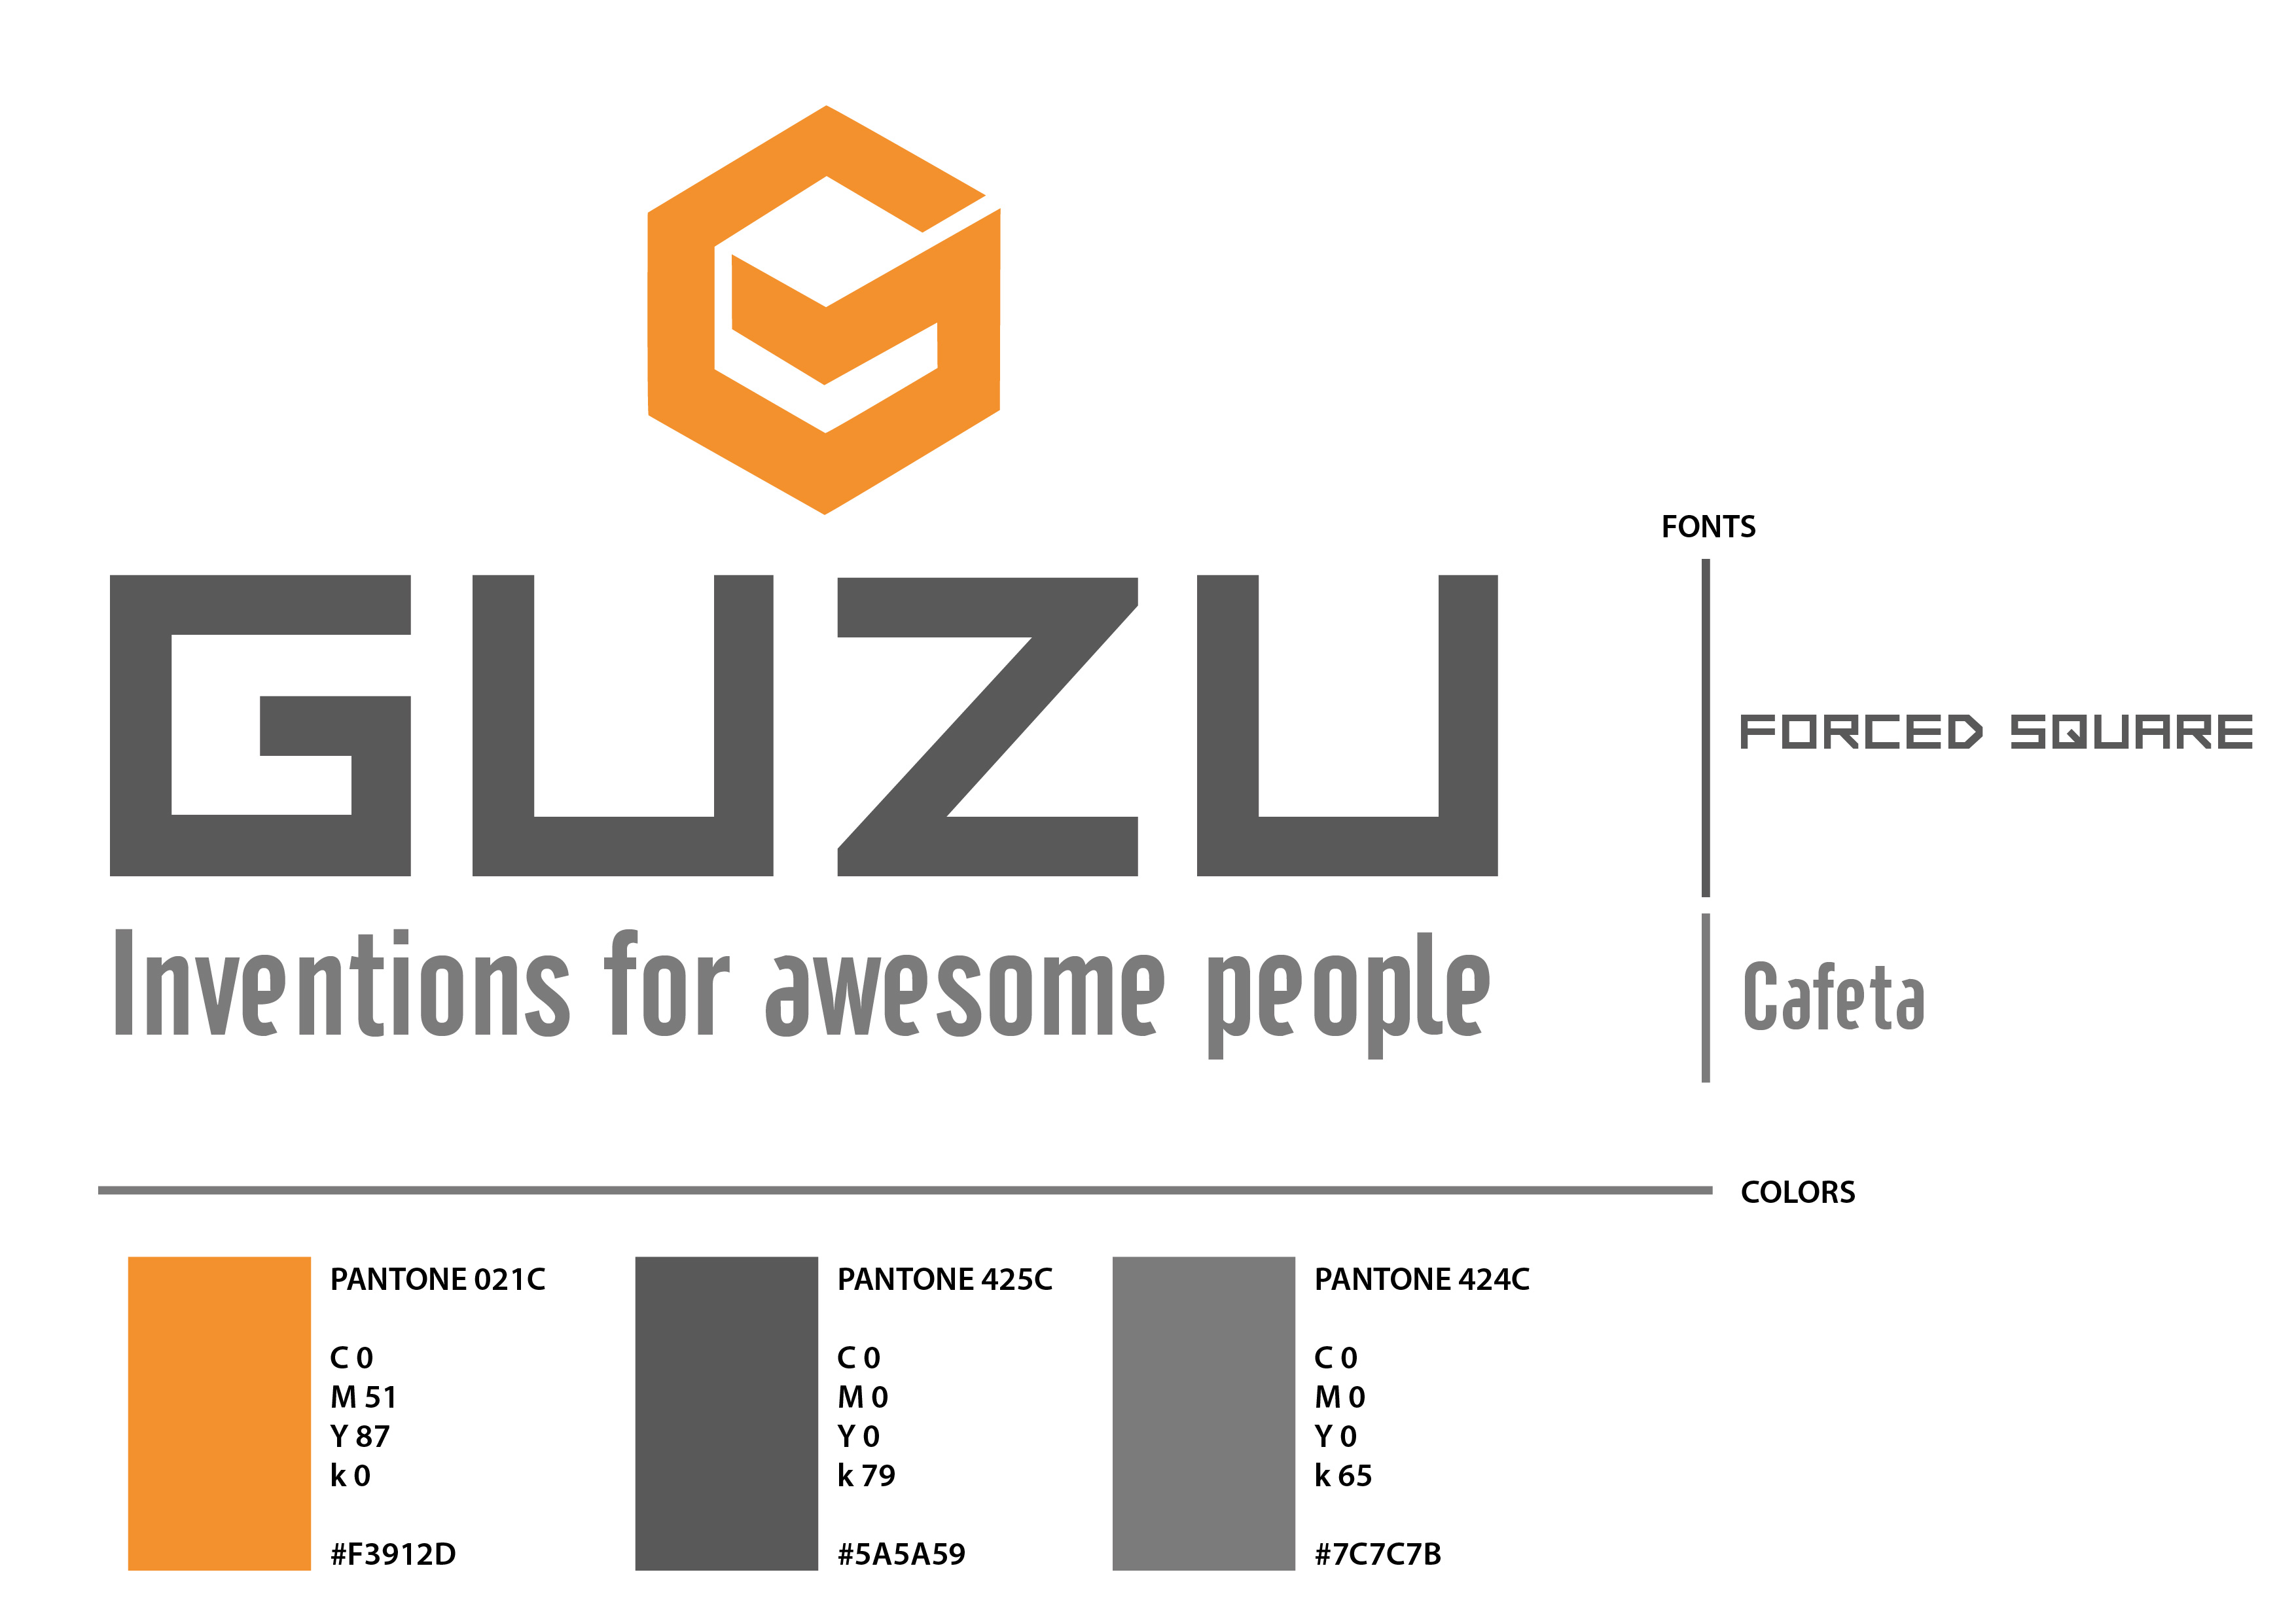 Guzu. Inventions for awesome people. 